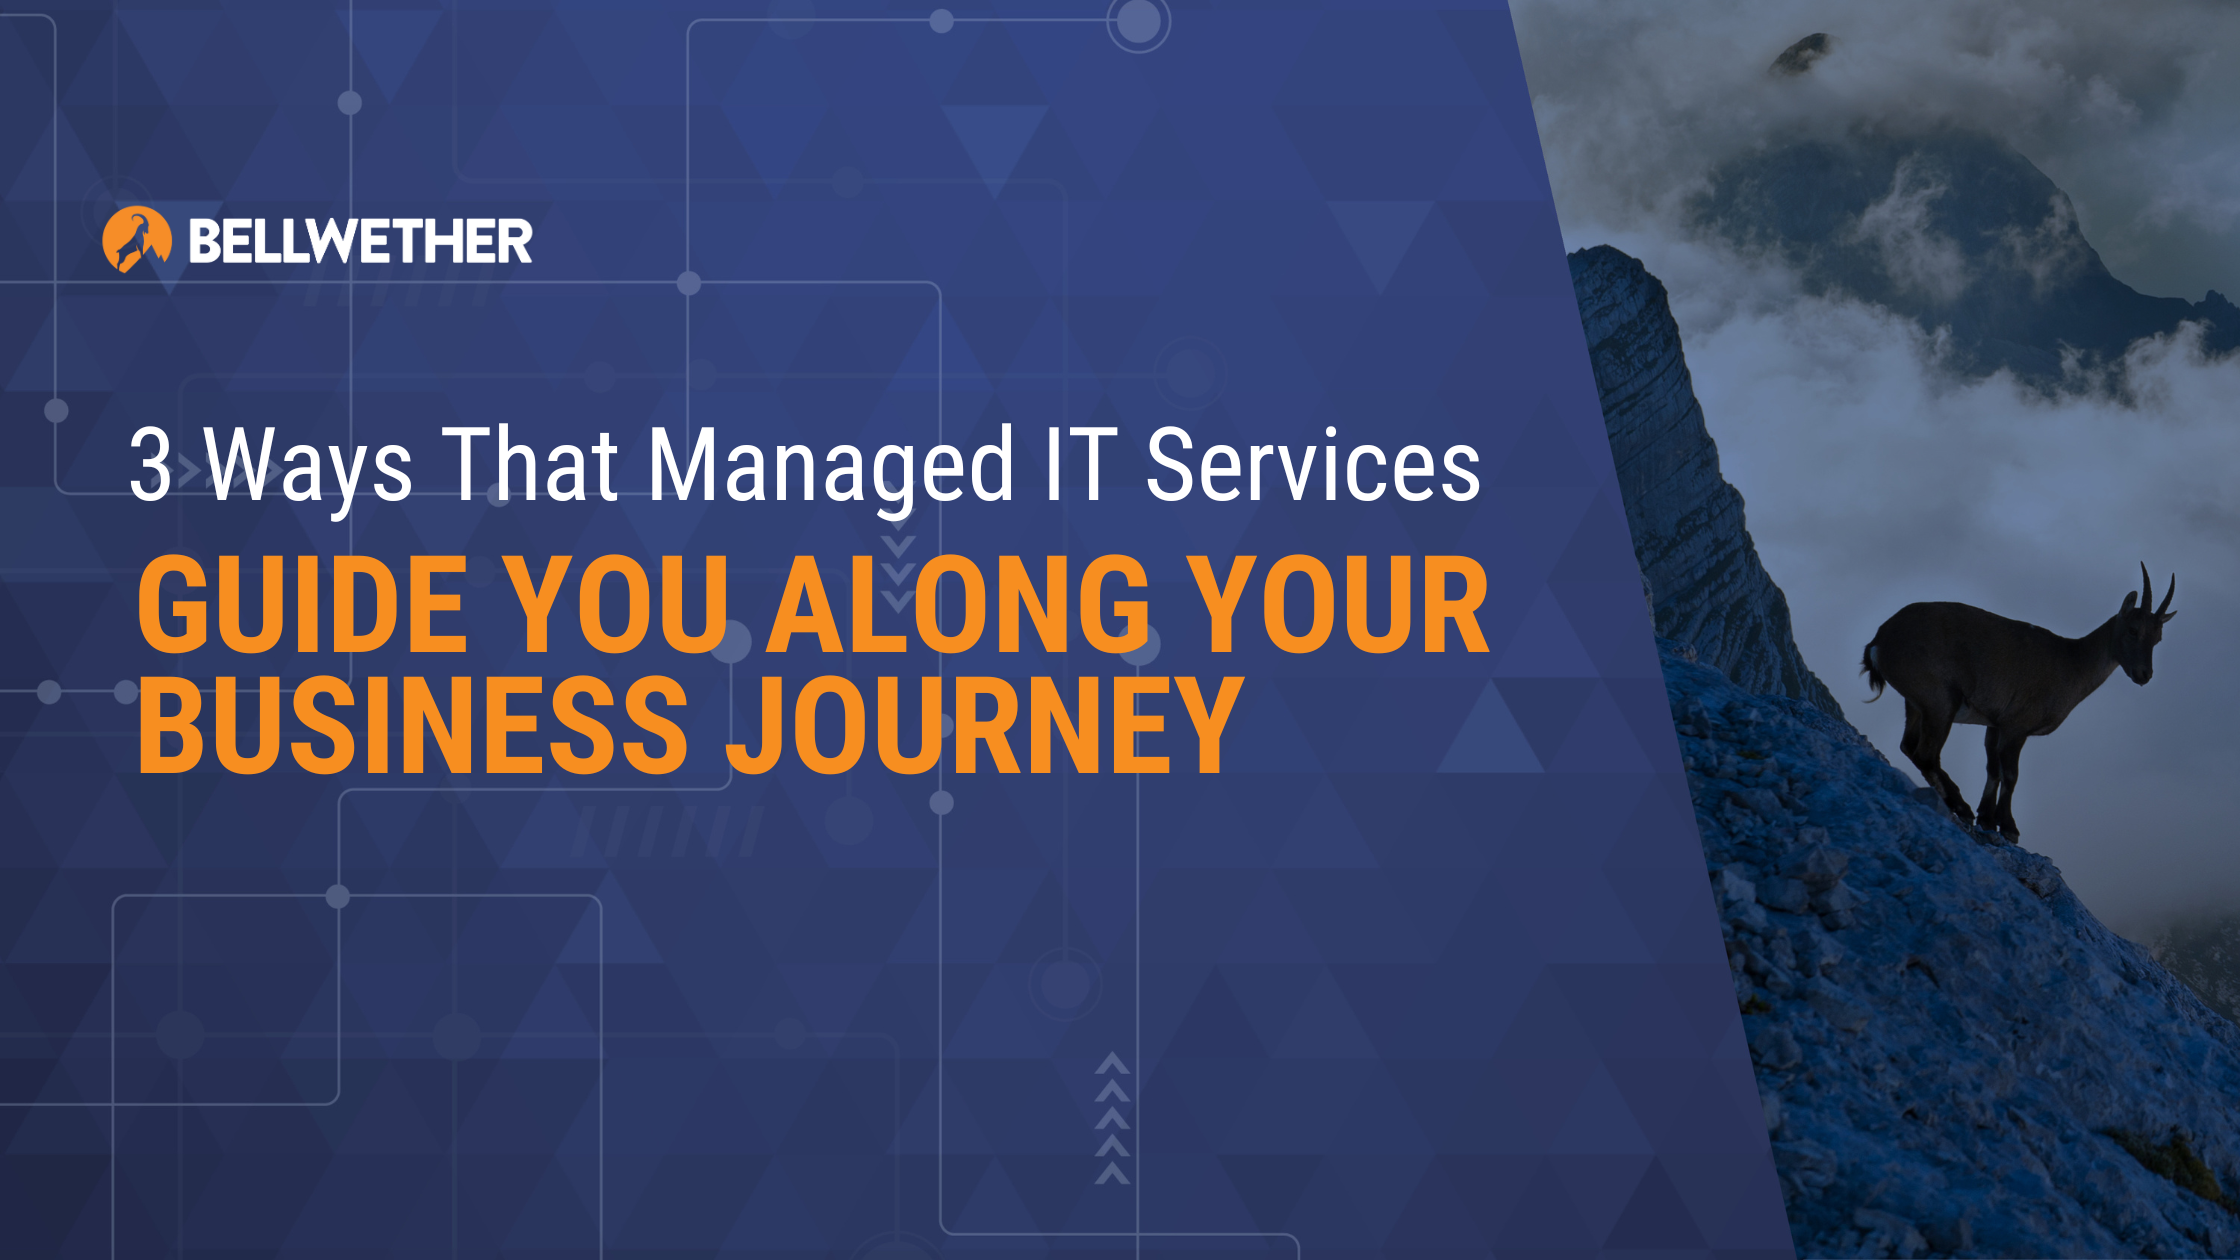 3 ways that managed IT services guide you along your business journey